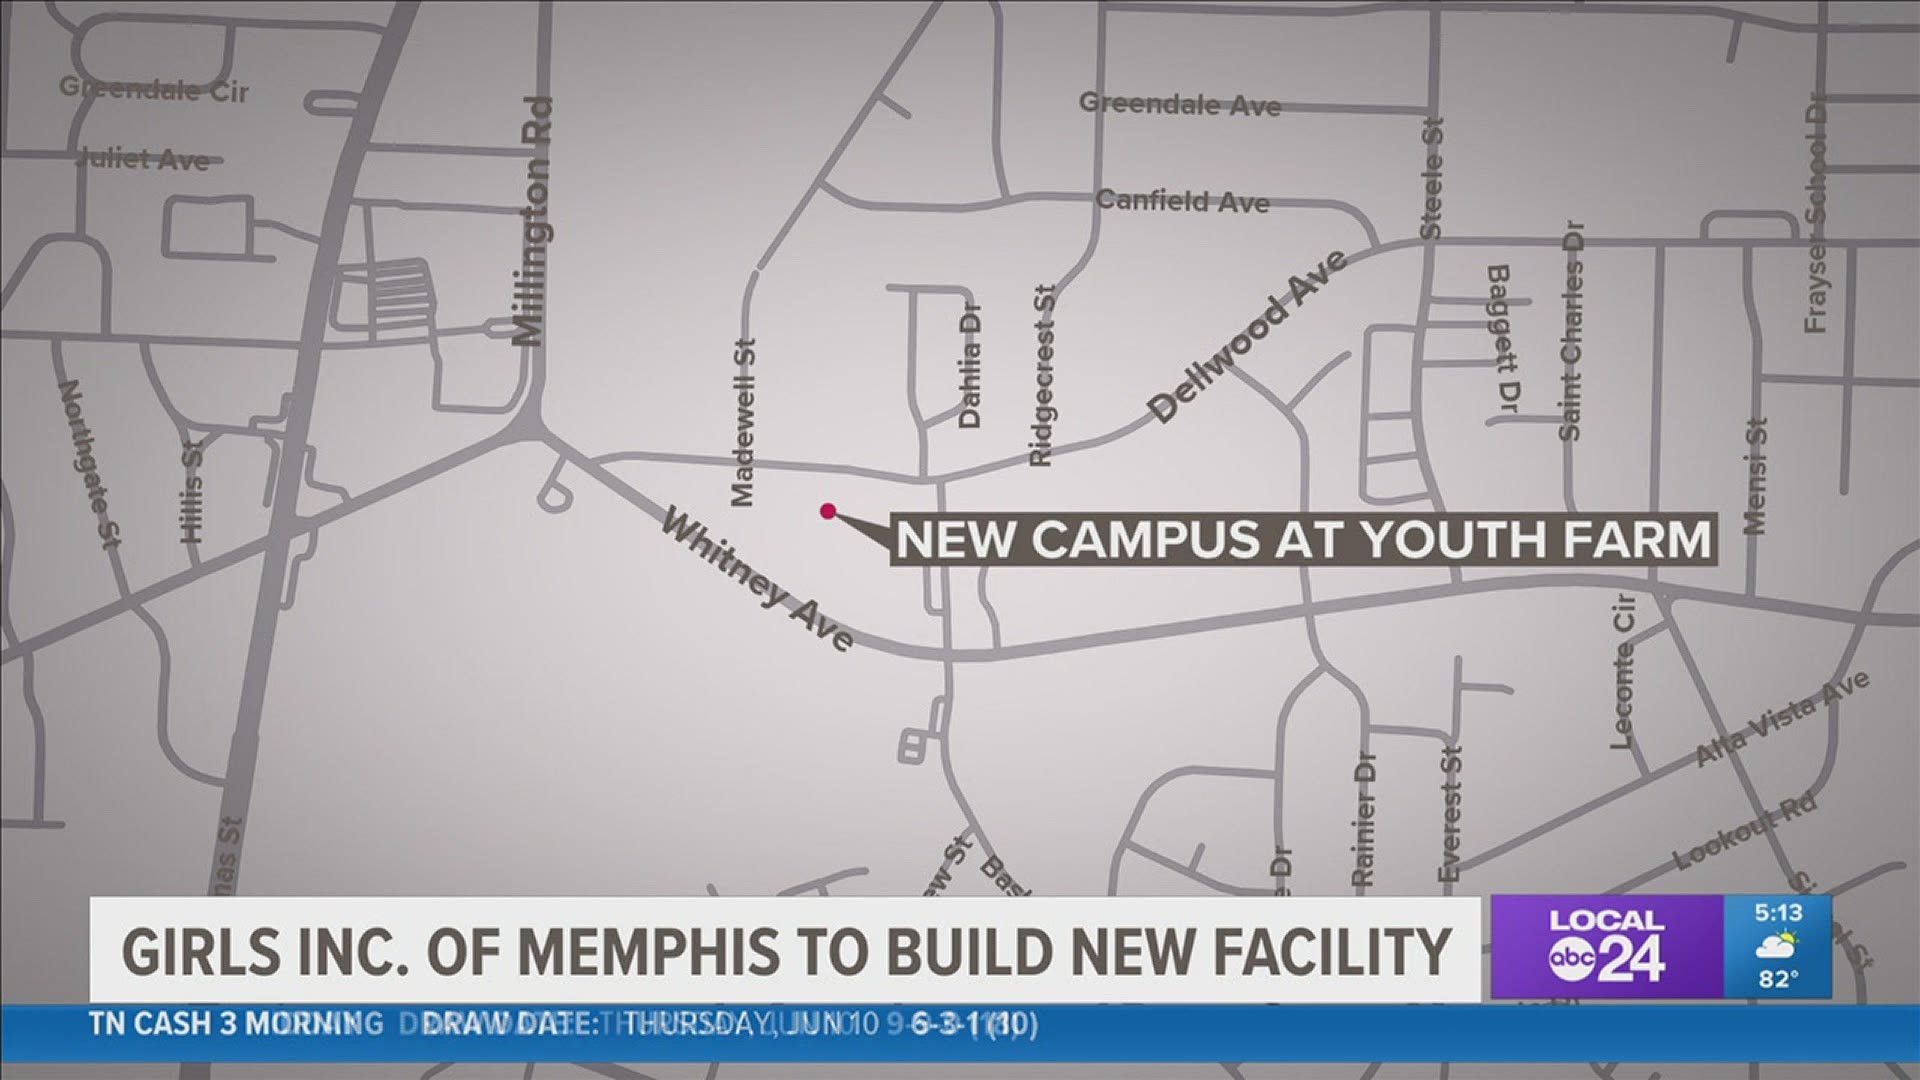 The campus will serve as an innovative center and will offer quality youth development programs.